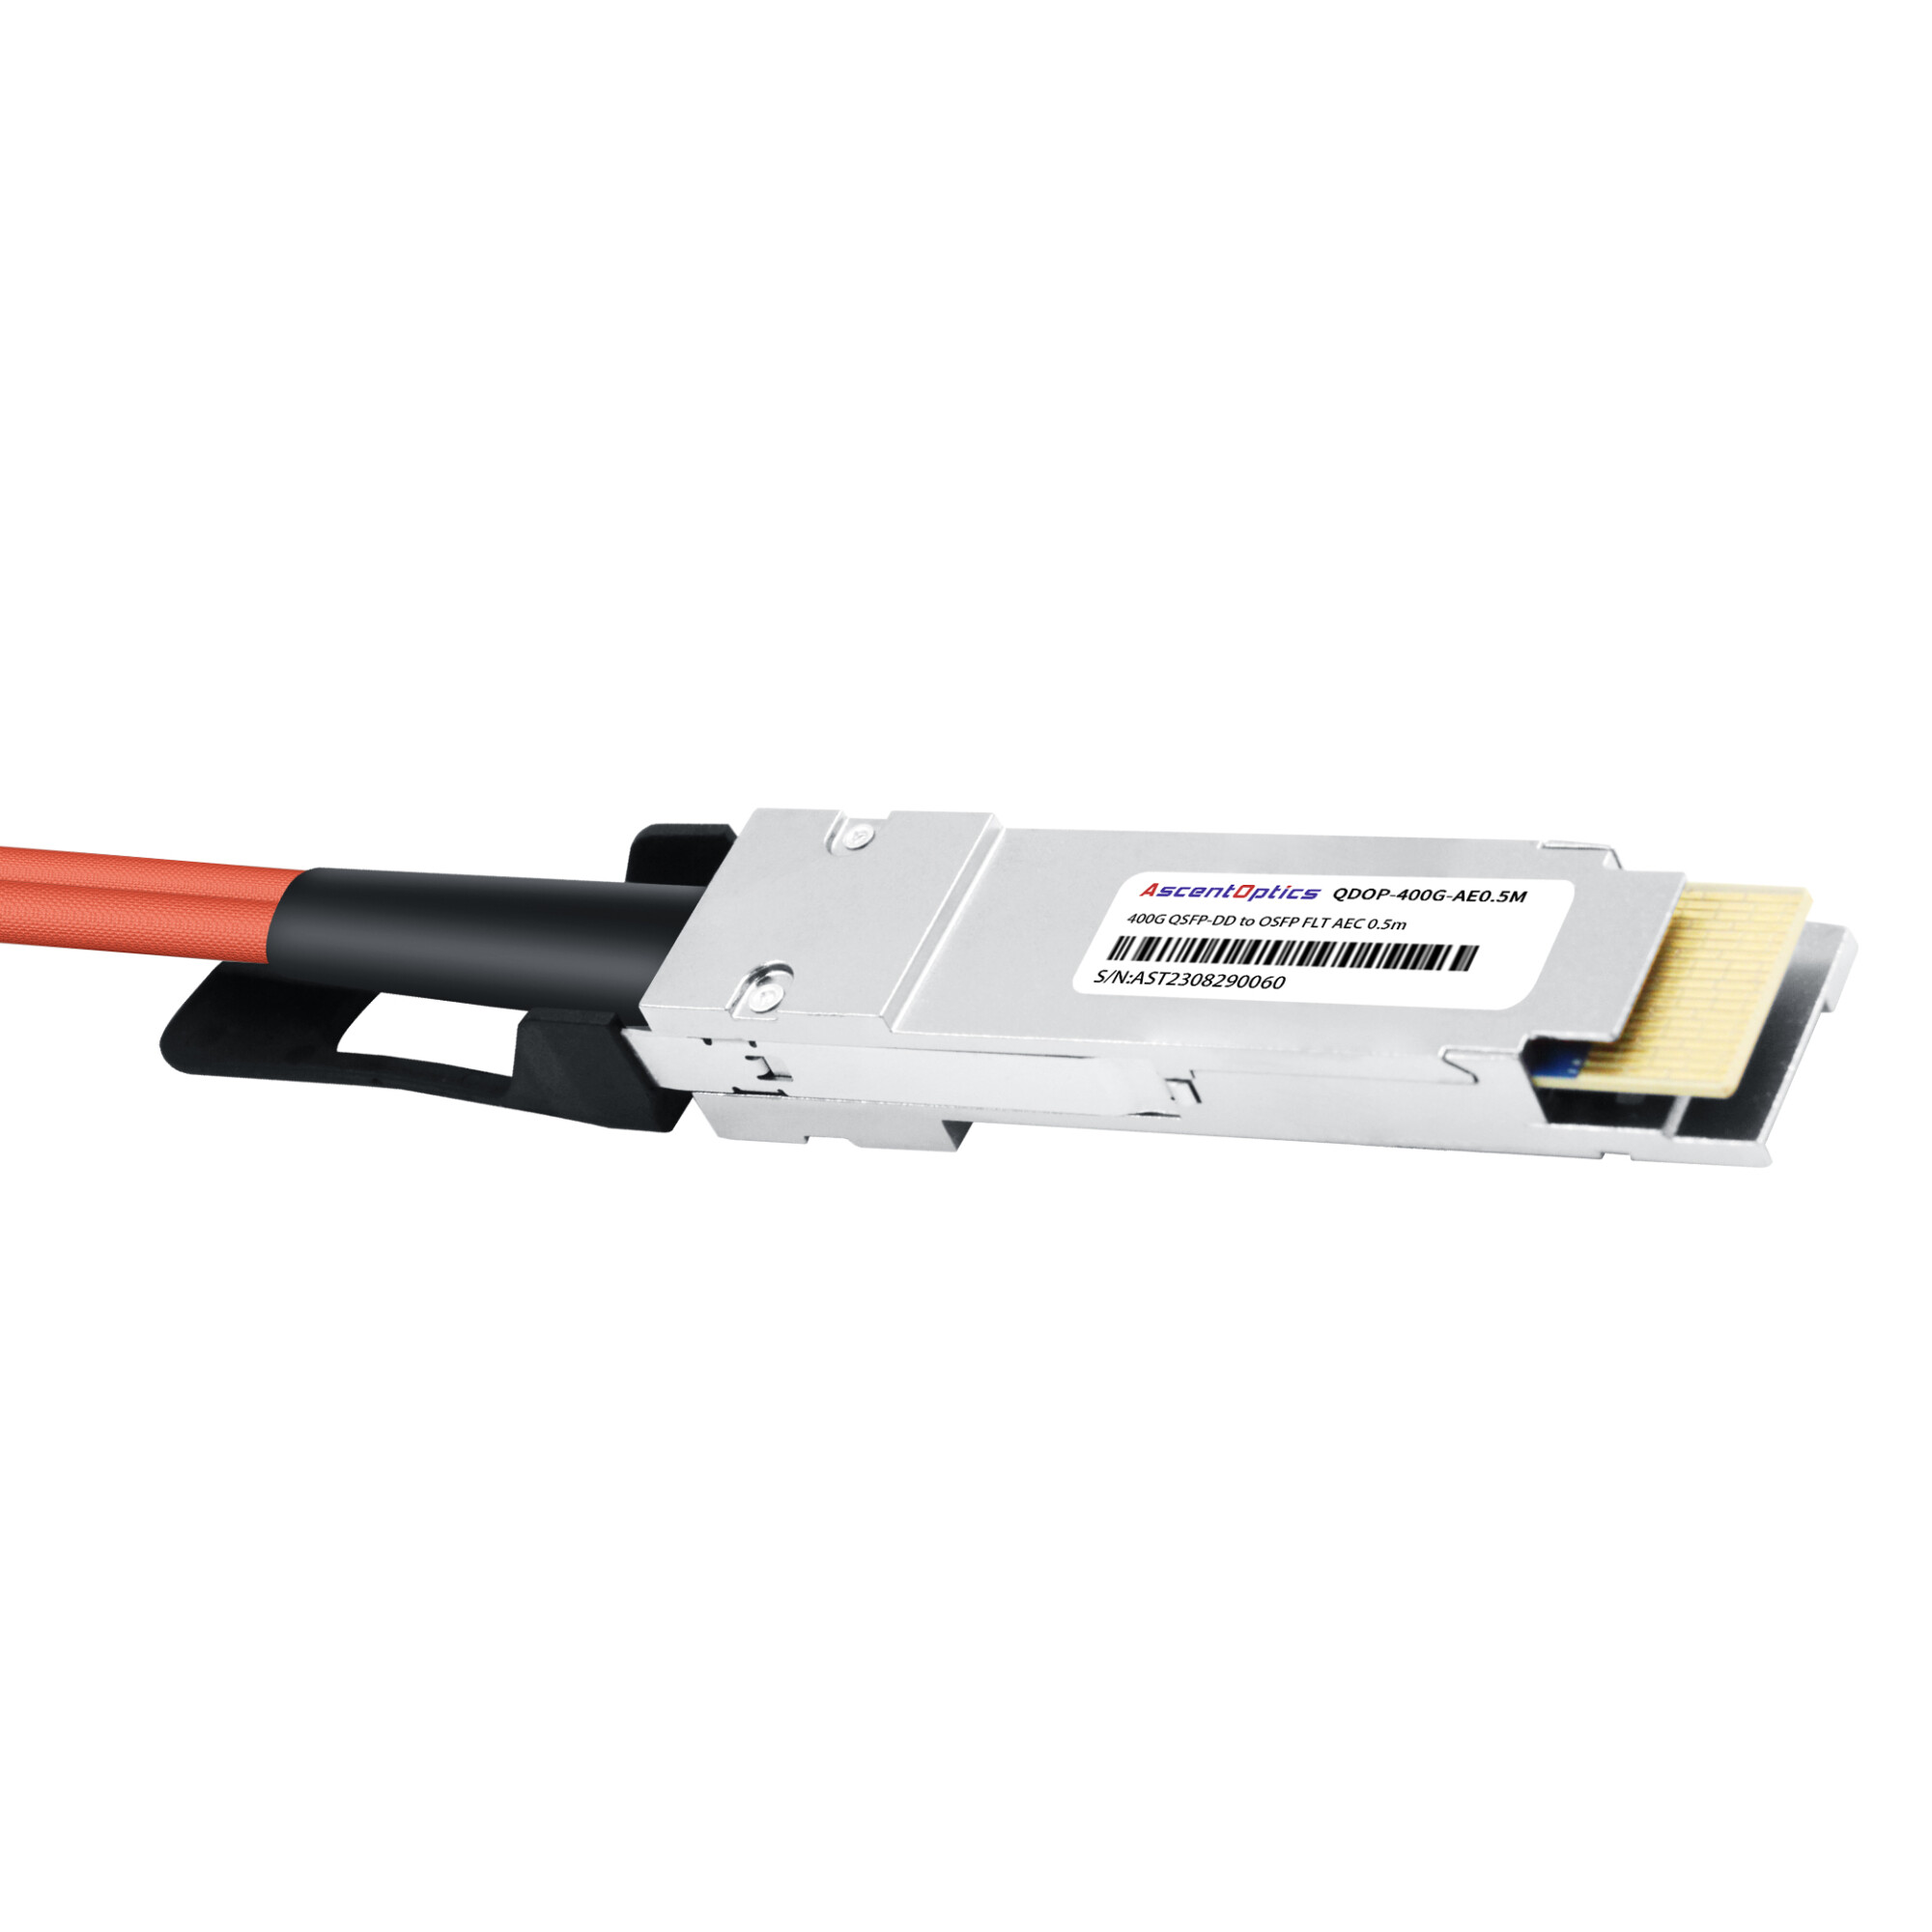 400G QSFP-DD to OSFP Flat Top AEC Cable,0.5 Meter,Passive